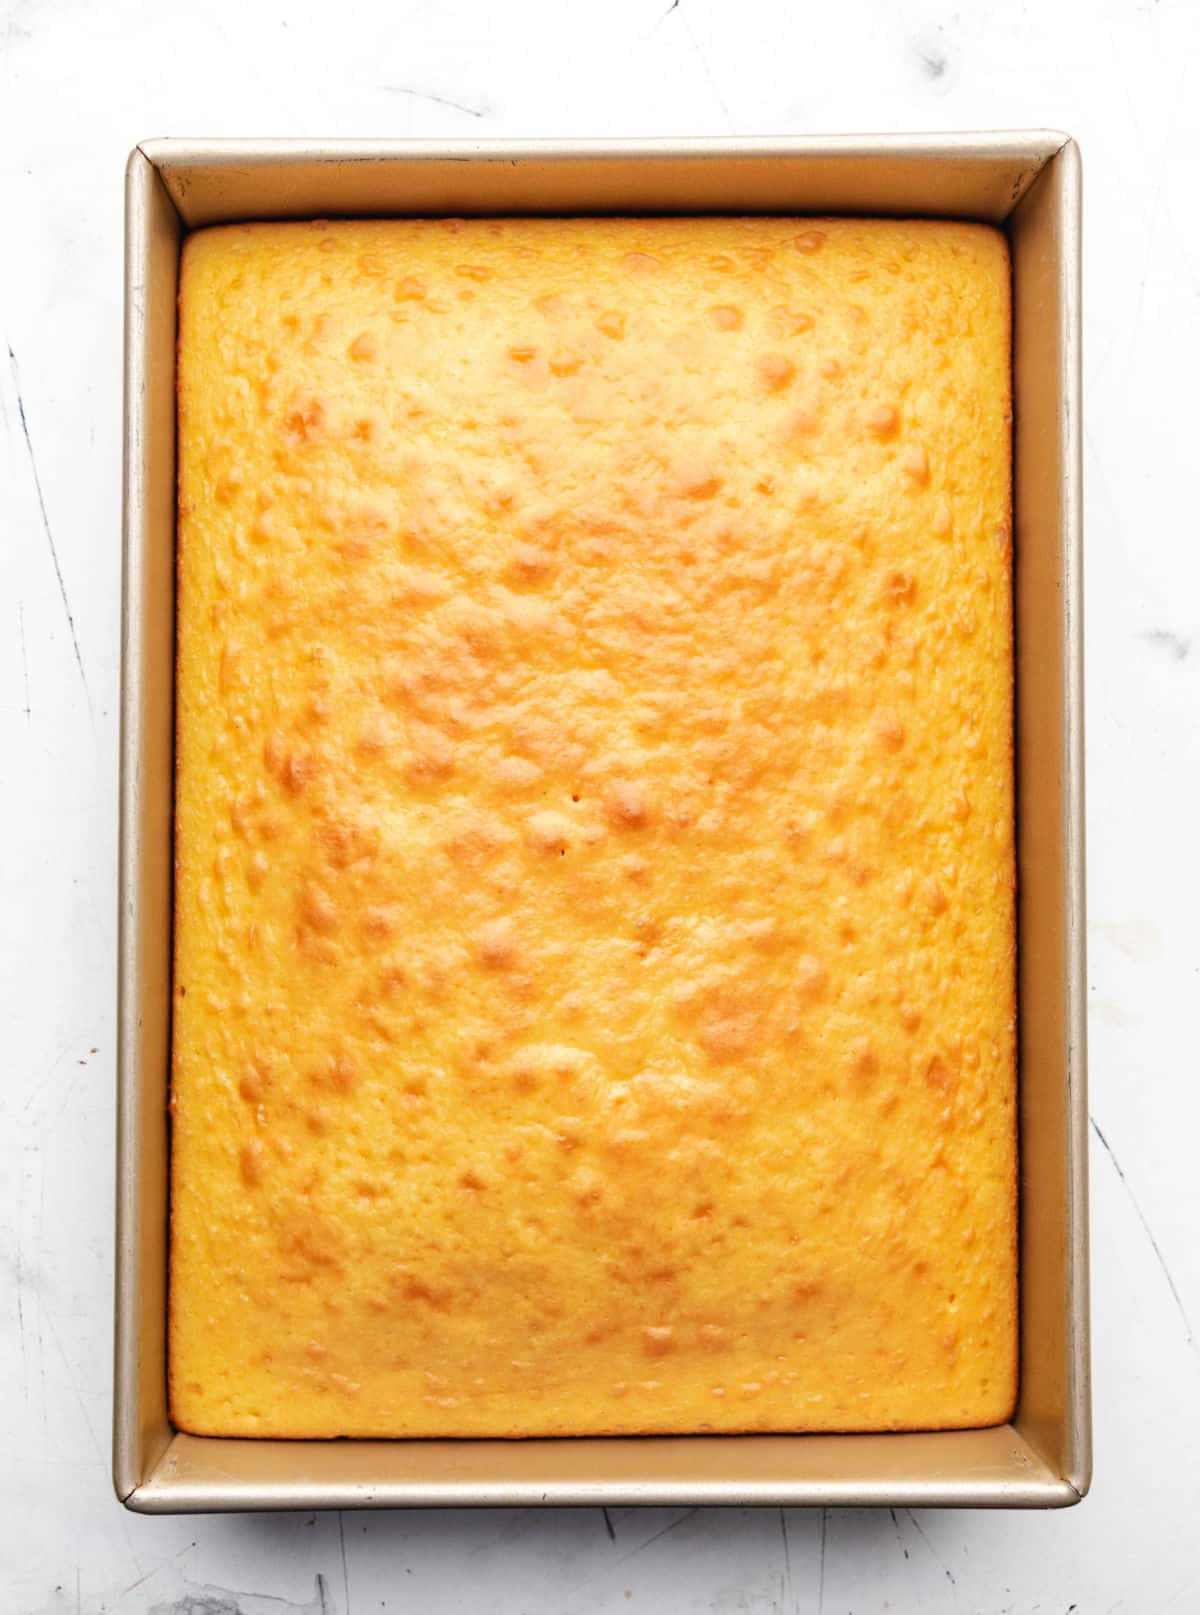 Pan of baked cornbread with cake mix on a marble background.